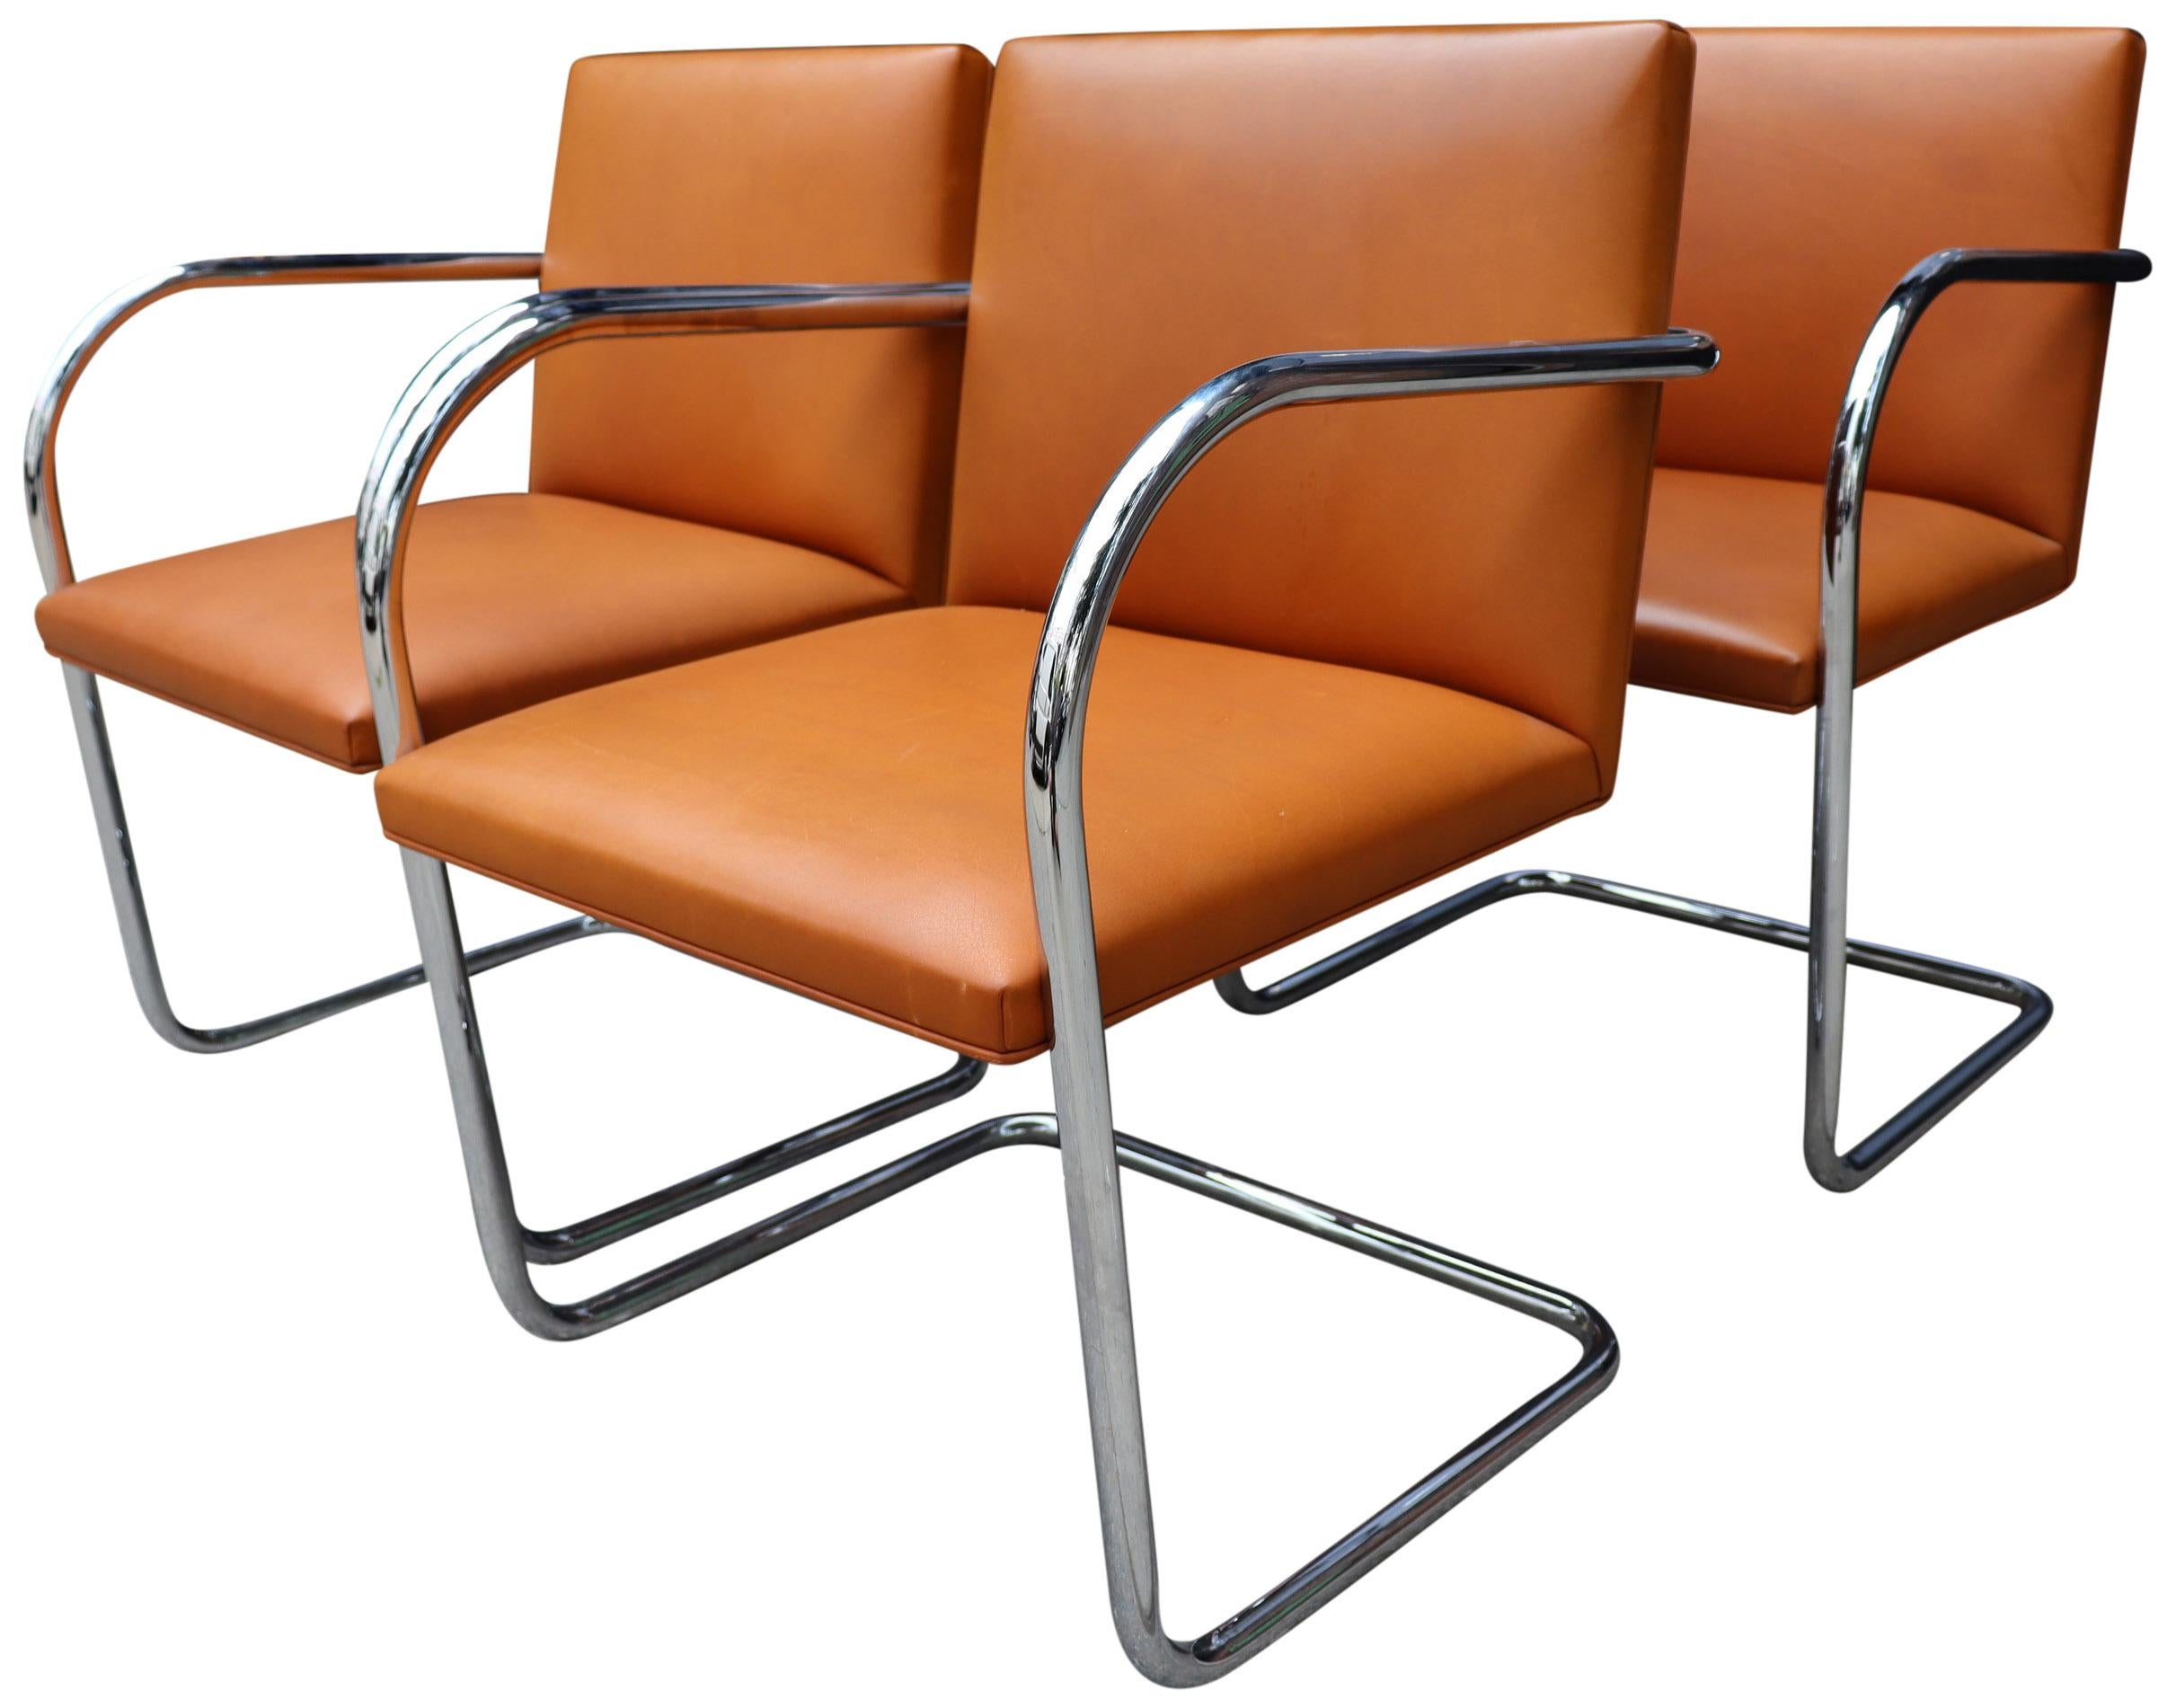 20th Century Authentic Set of Four Midcentury Knoll Brno Chairs by Mies van der Rohe